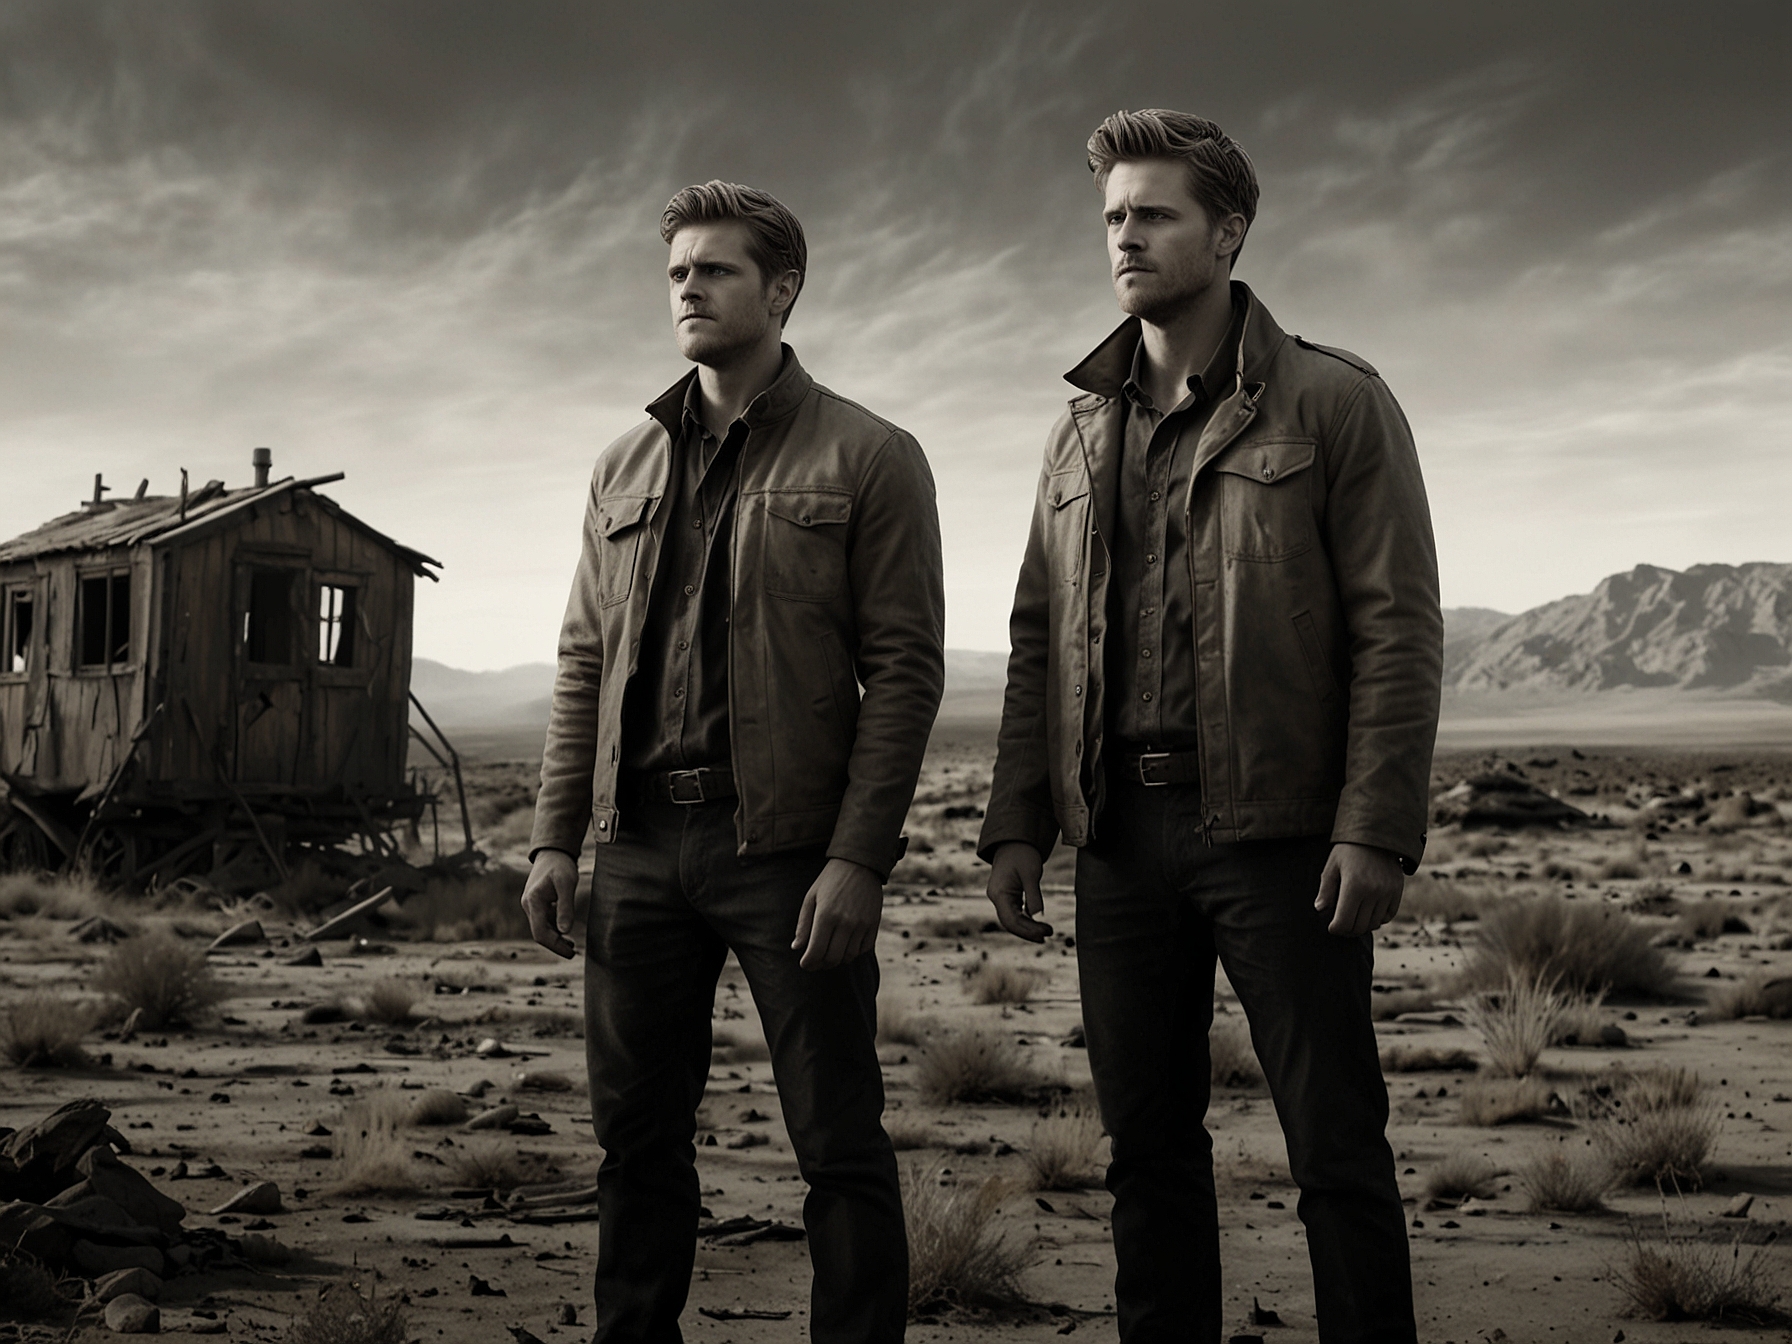 Aaron Tveit, Alexander Ludwig, and Jessica Frances Dukes in character, standing in a desolate, post-apocalyptic landscape, capturing the essence of survival and human resilience.